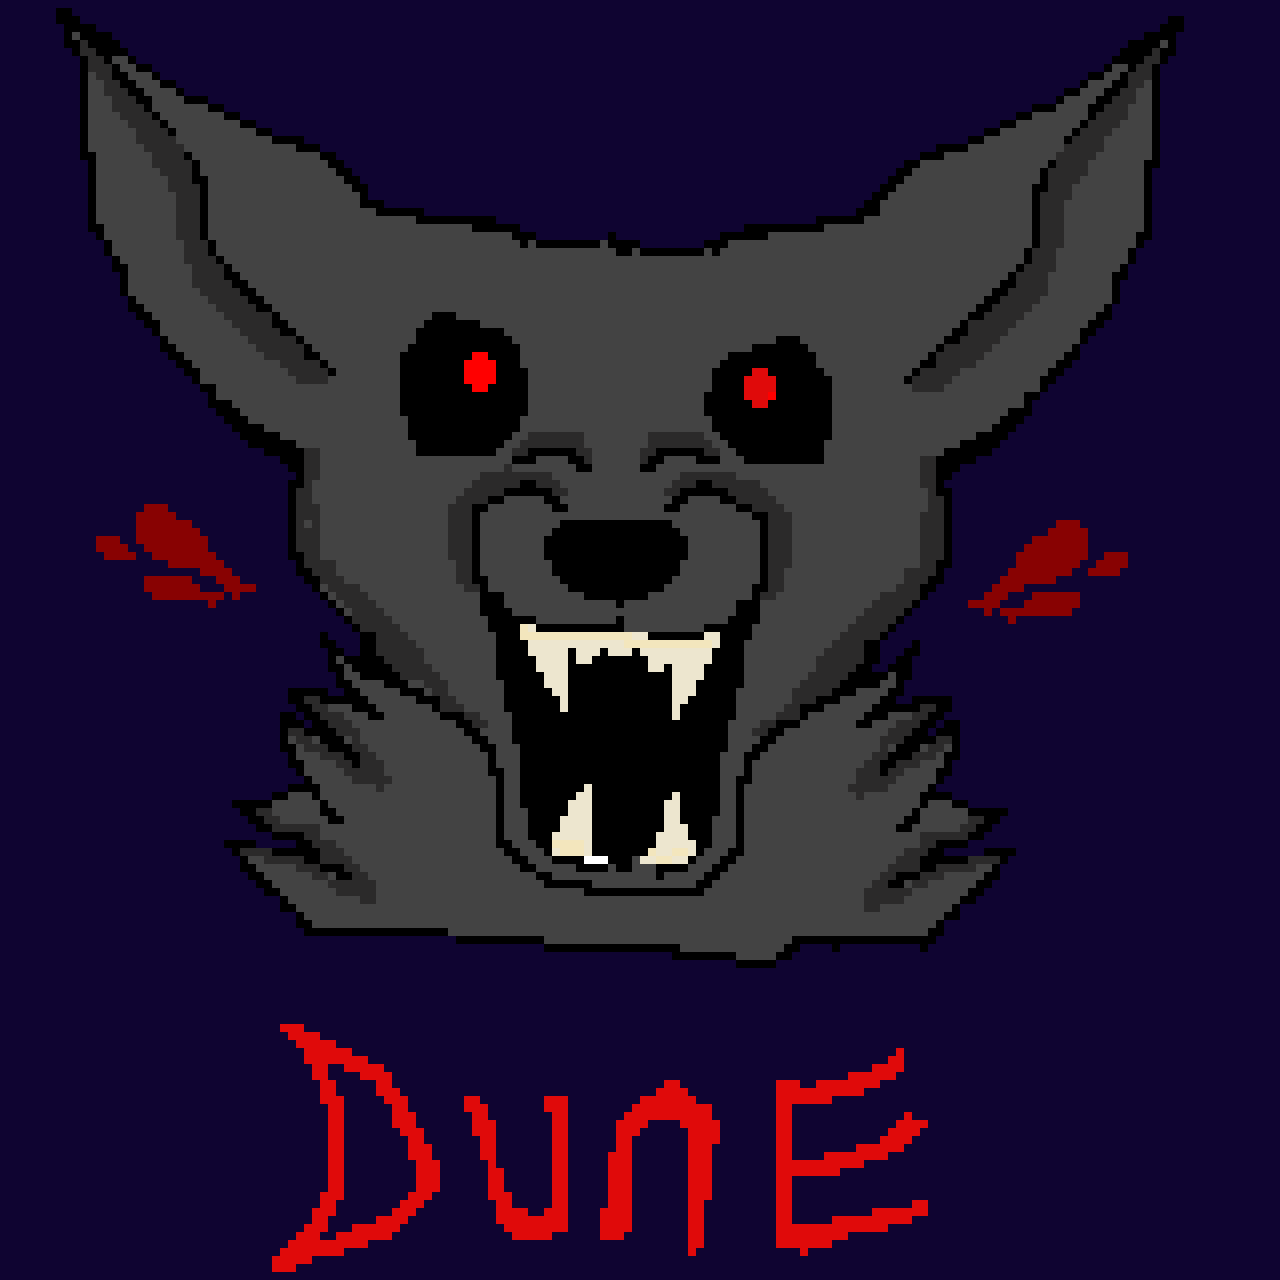 Dune an oc of mine (profile pic)